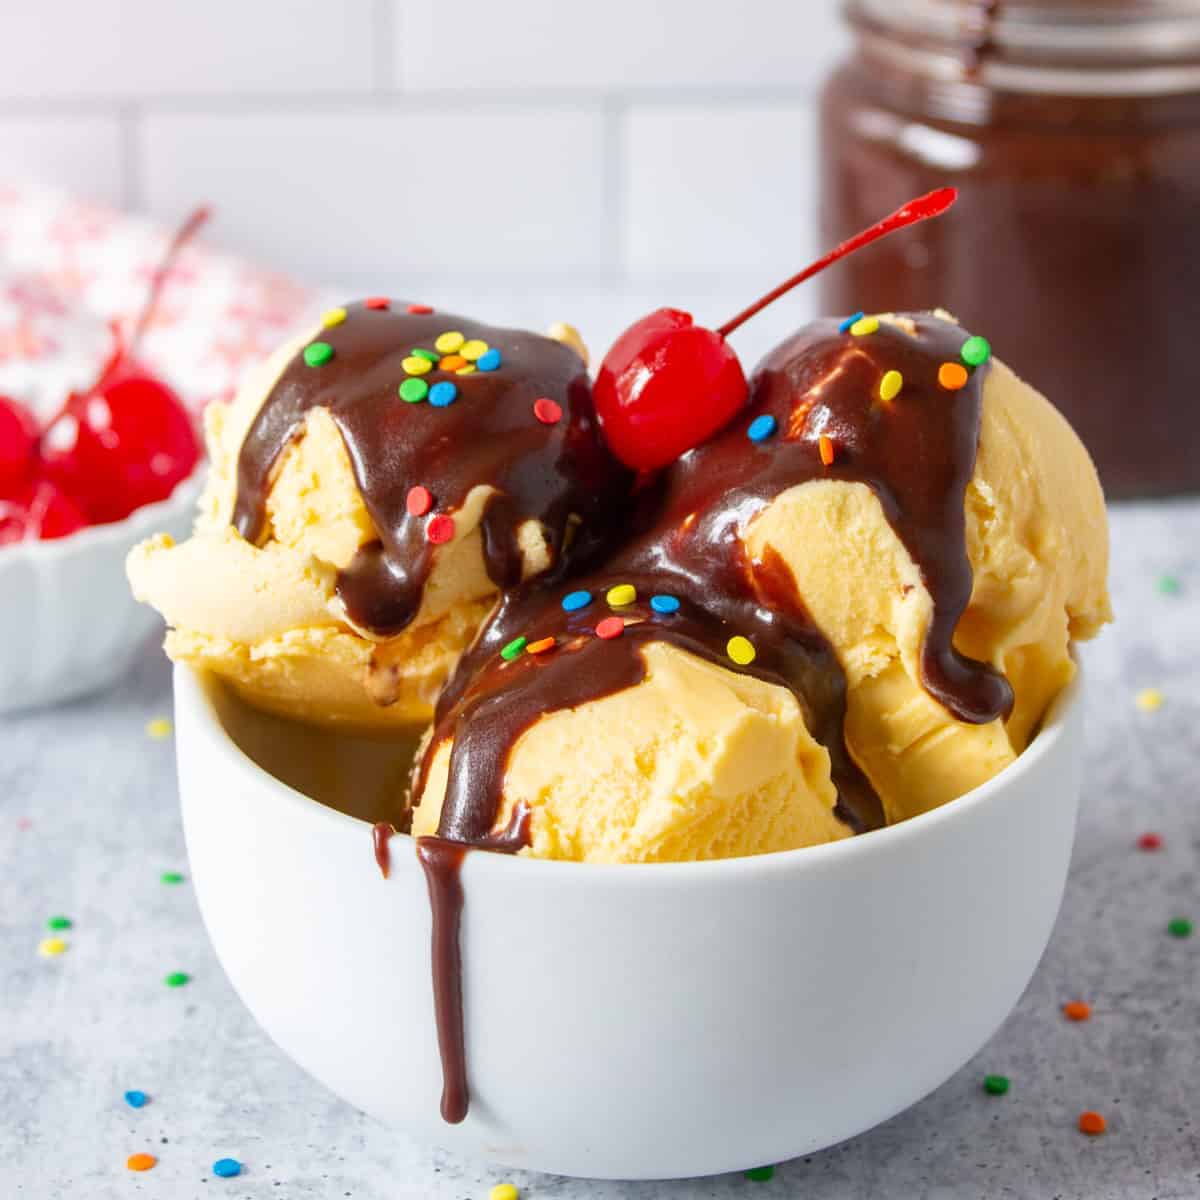 Hot fudge sauce dripping on top of vanilla ice cream topped with colored sprinkles and a cherry.